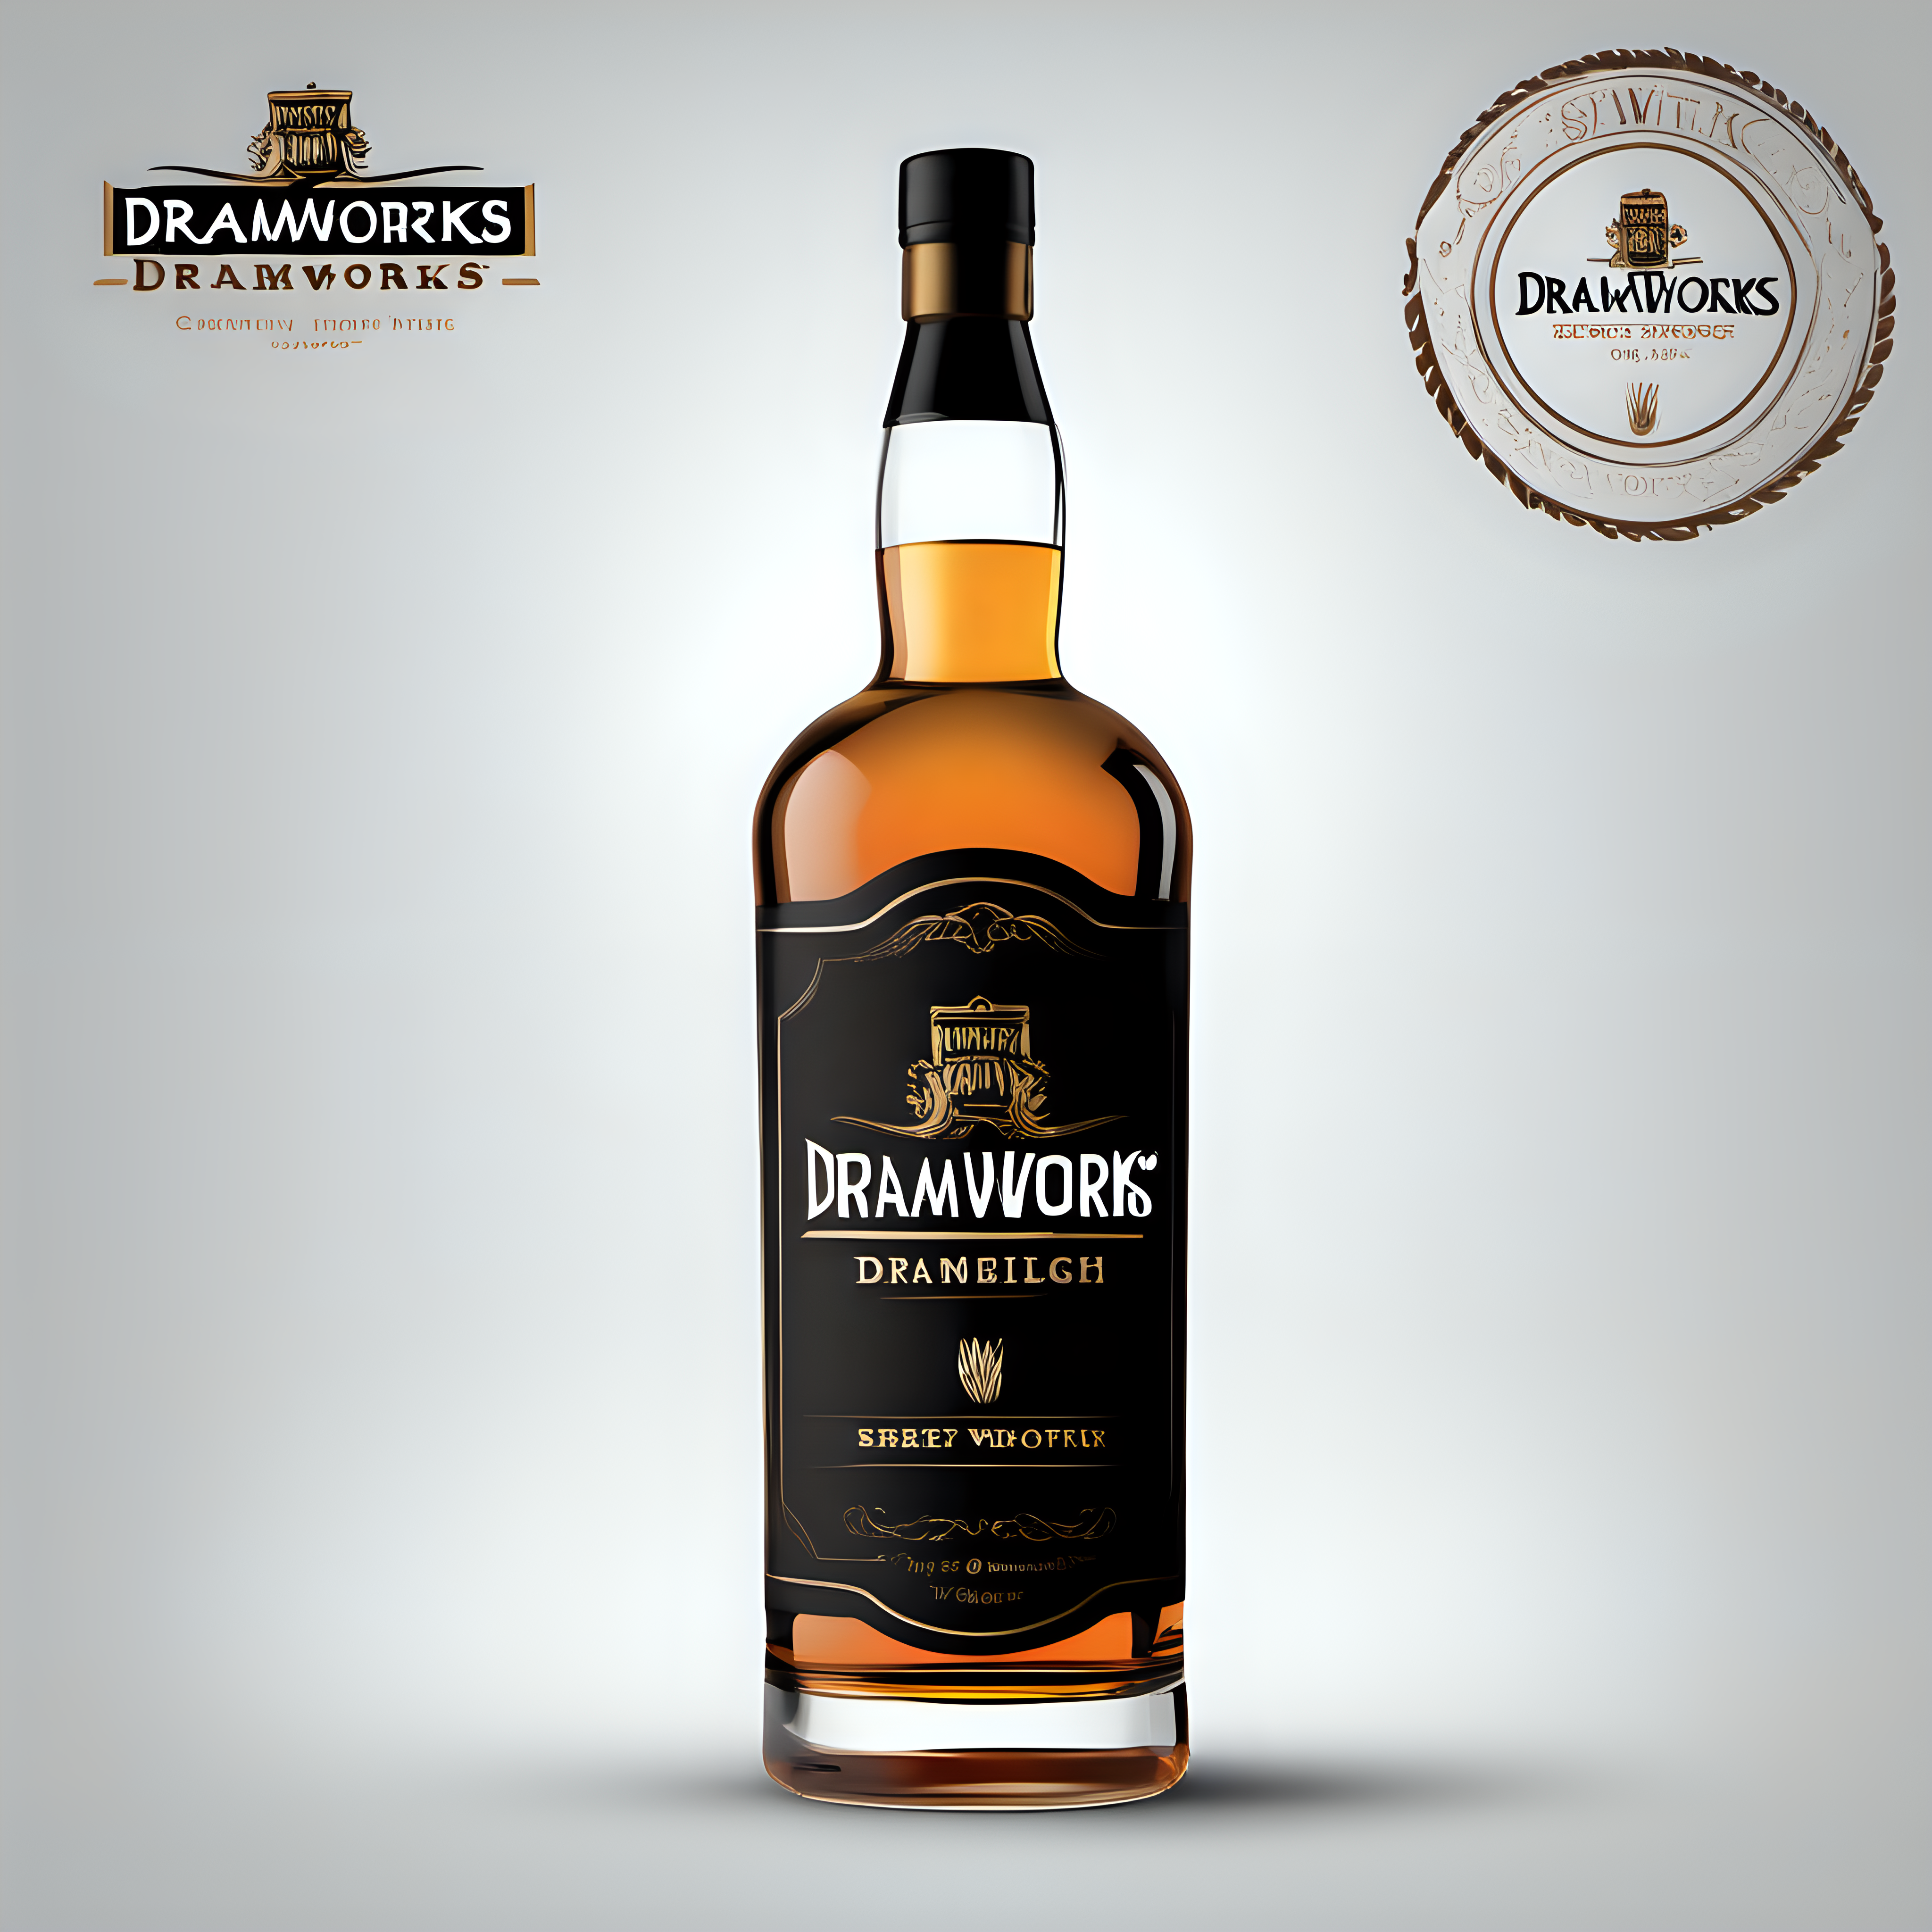 create a logo for "Dramworks" whisky brand using modern clean font  and features barley and uses a "W" on the bottle